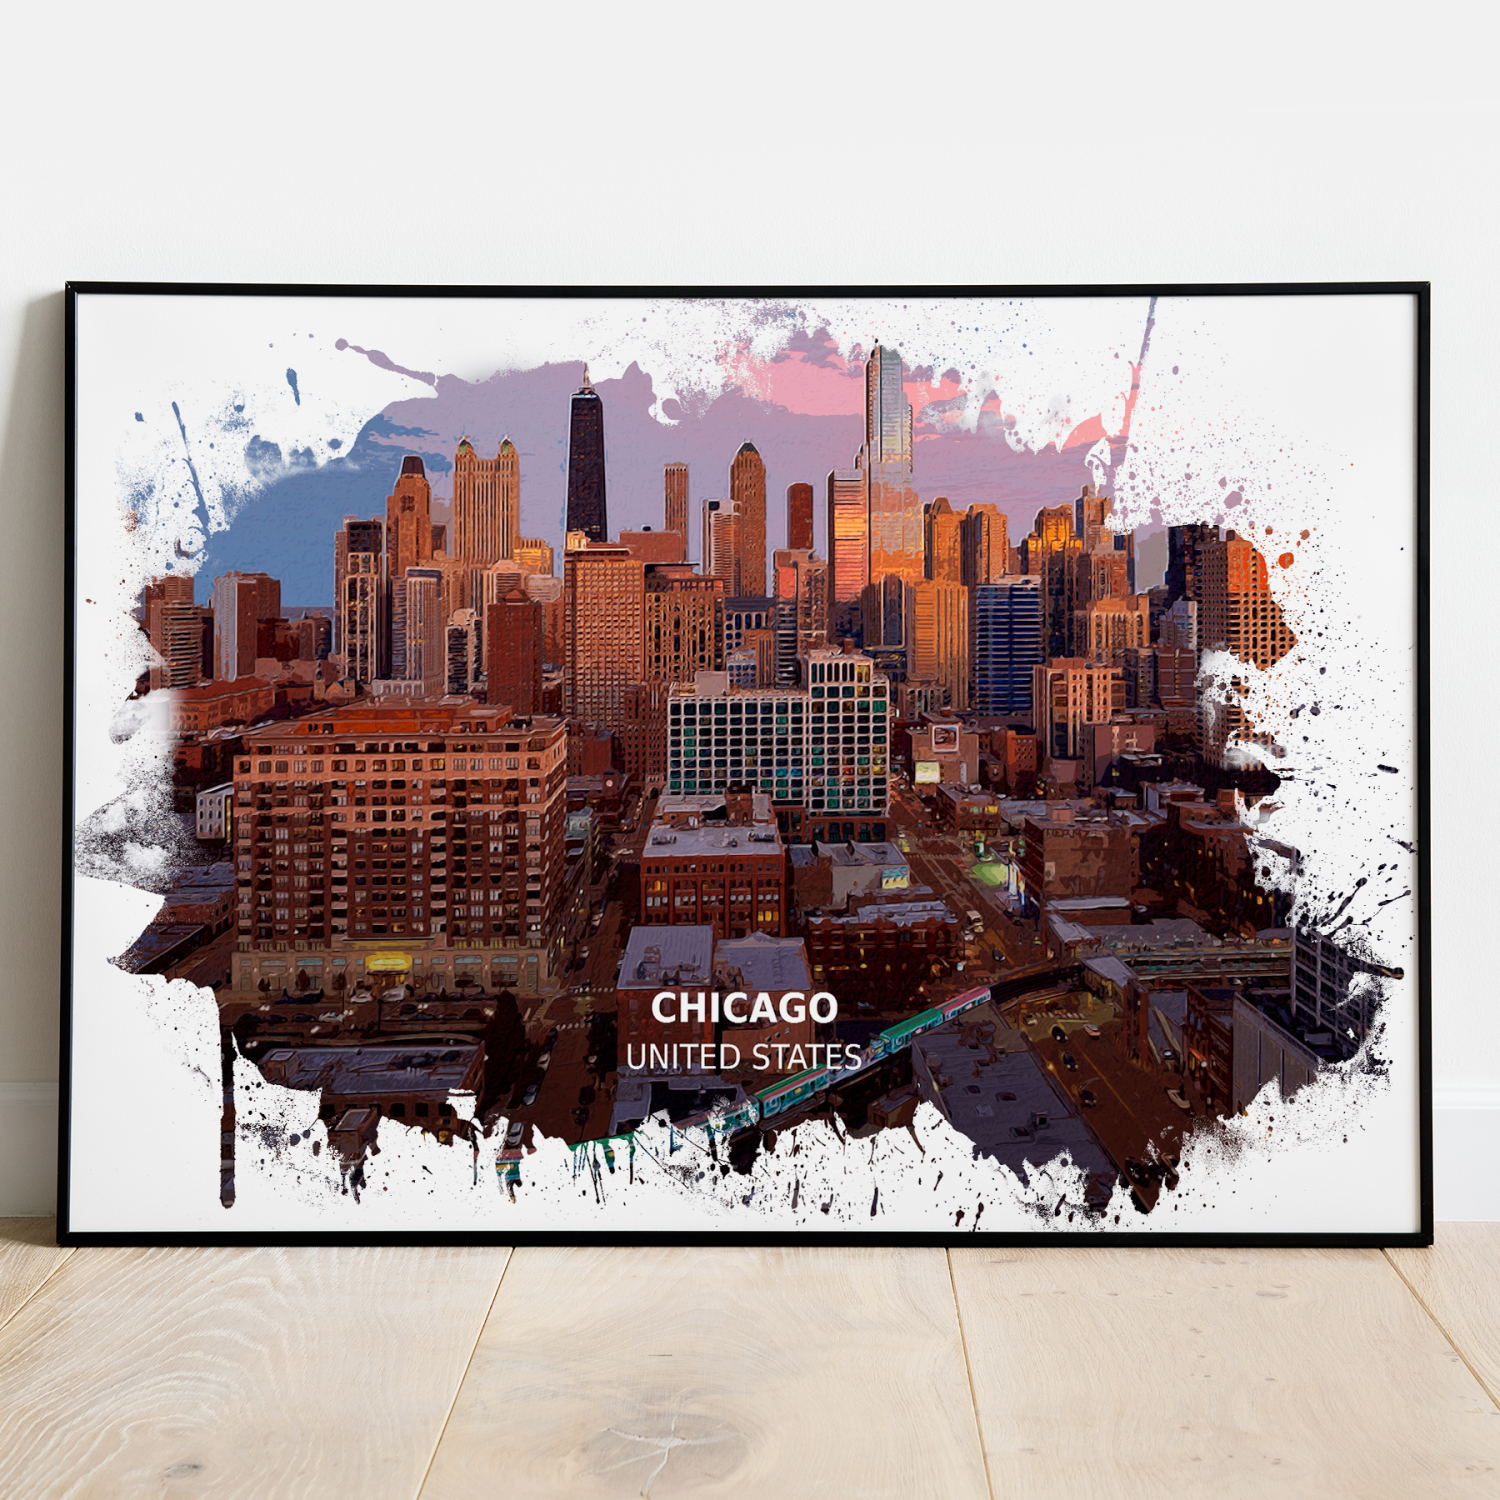 Chicago - United States - Print - A4 - Standard - Print Only